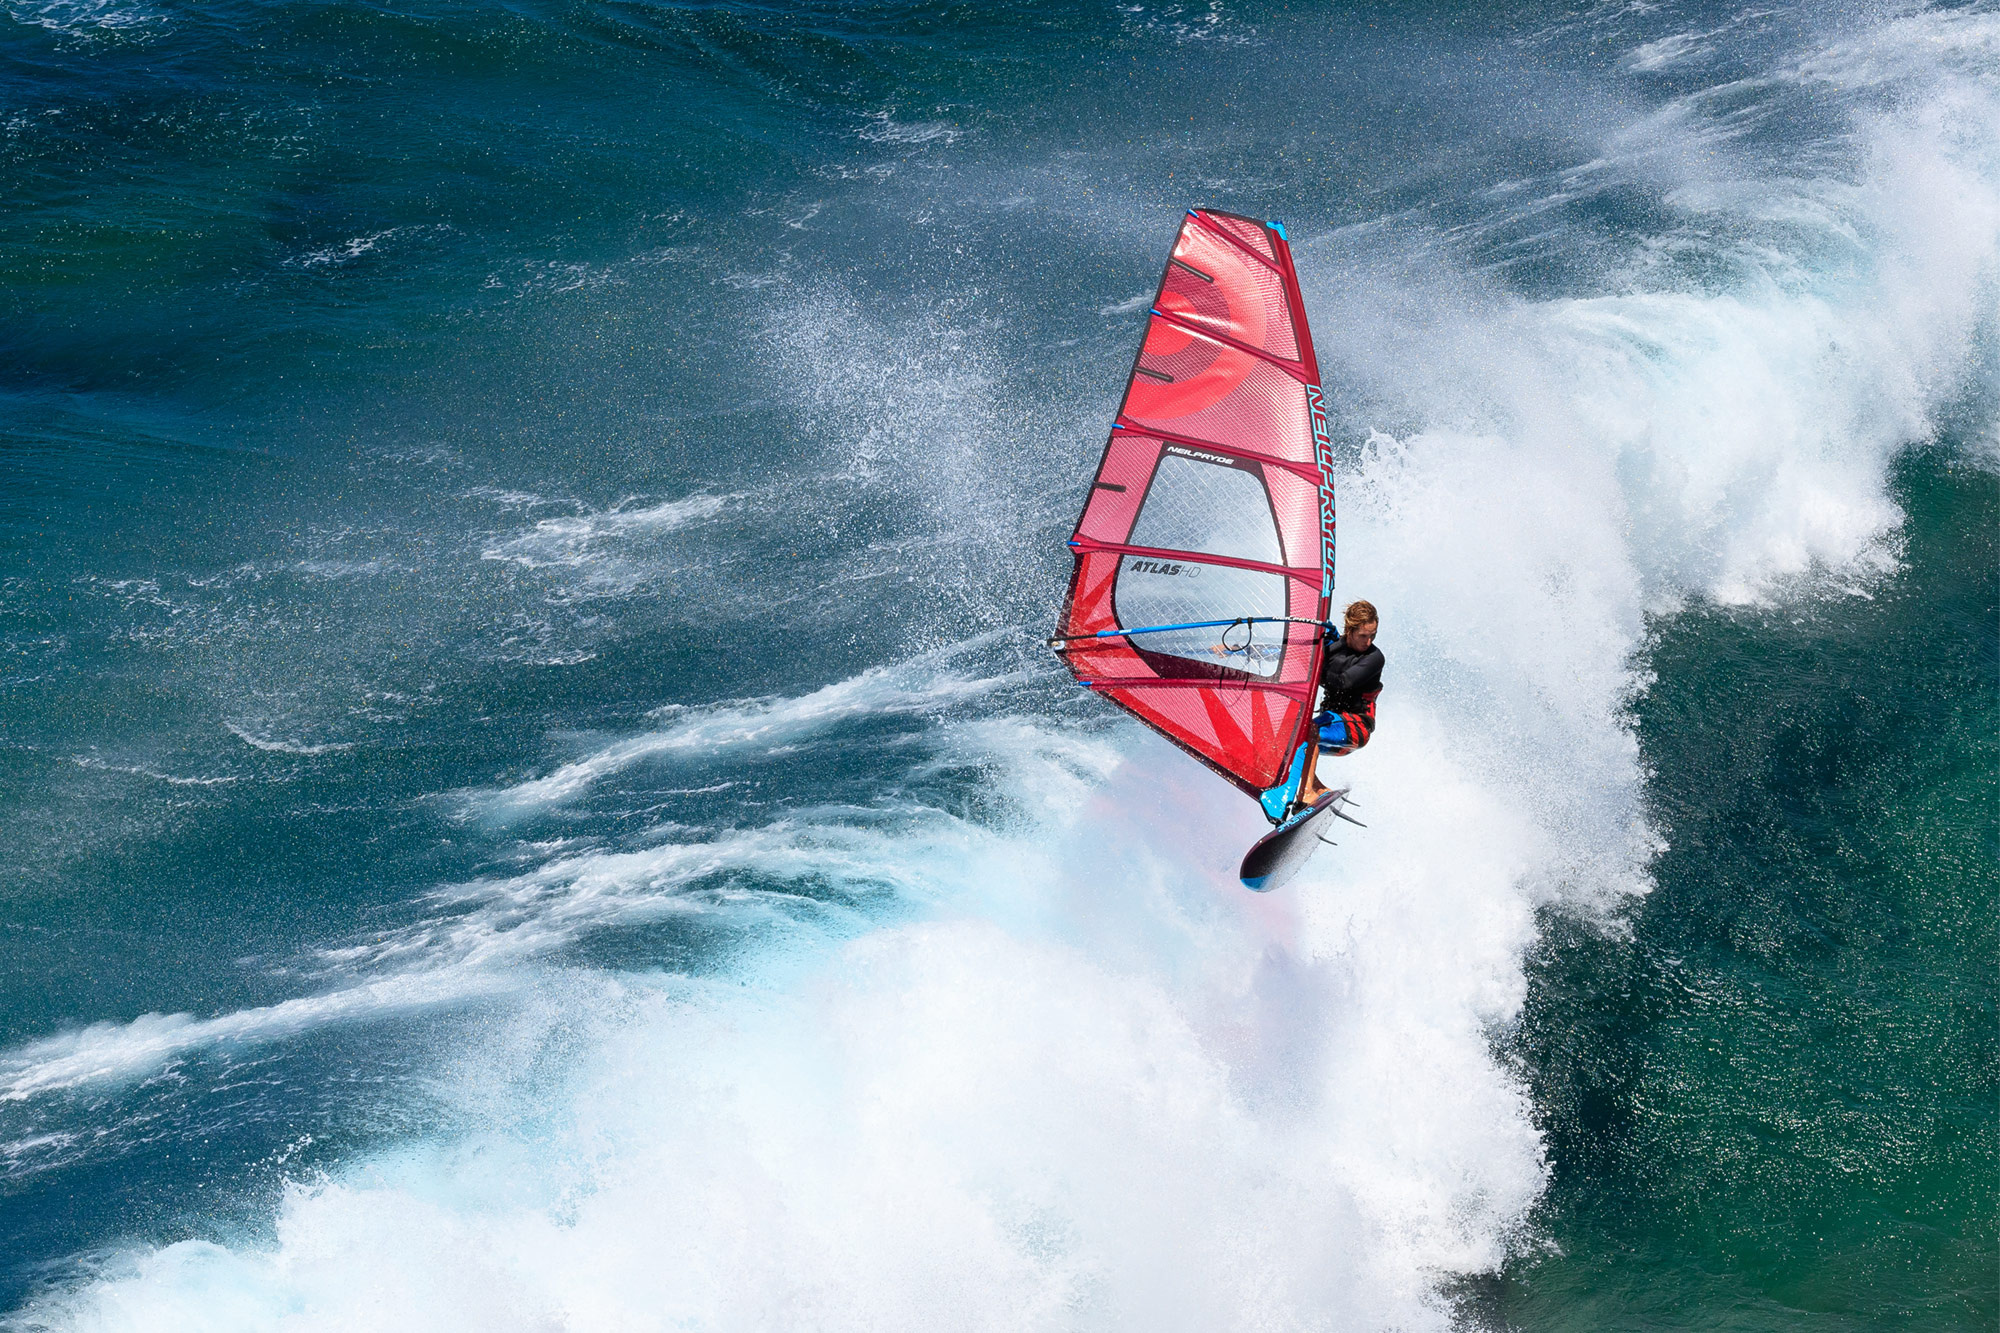 Windsurfing: NeilPryde 2020 Sail, Overcoming Waves Obstacles, Pro Sailing. 2000x1340 HD Wallpaper.